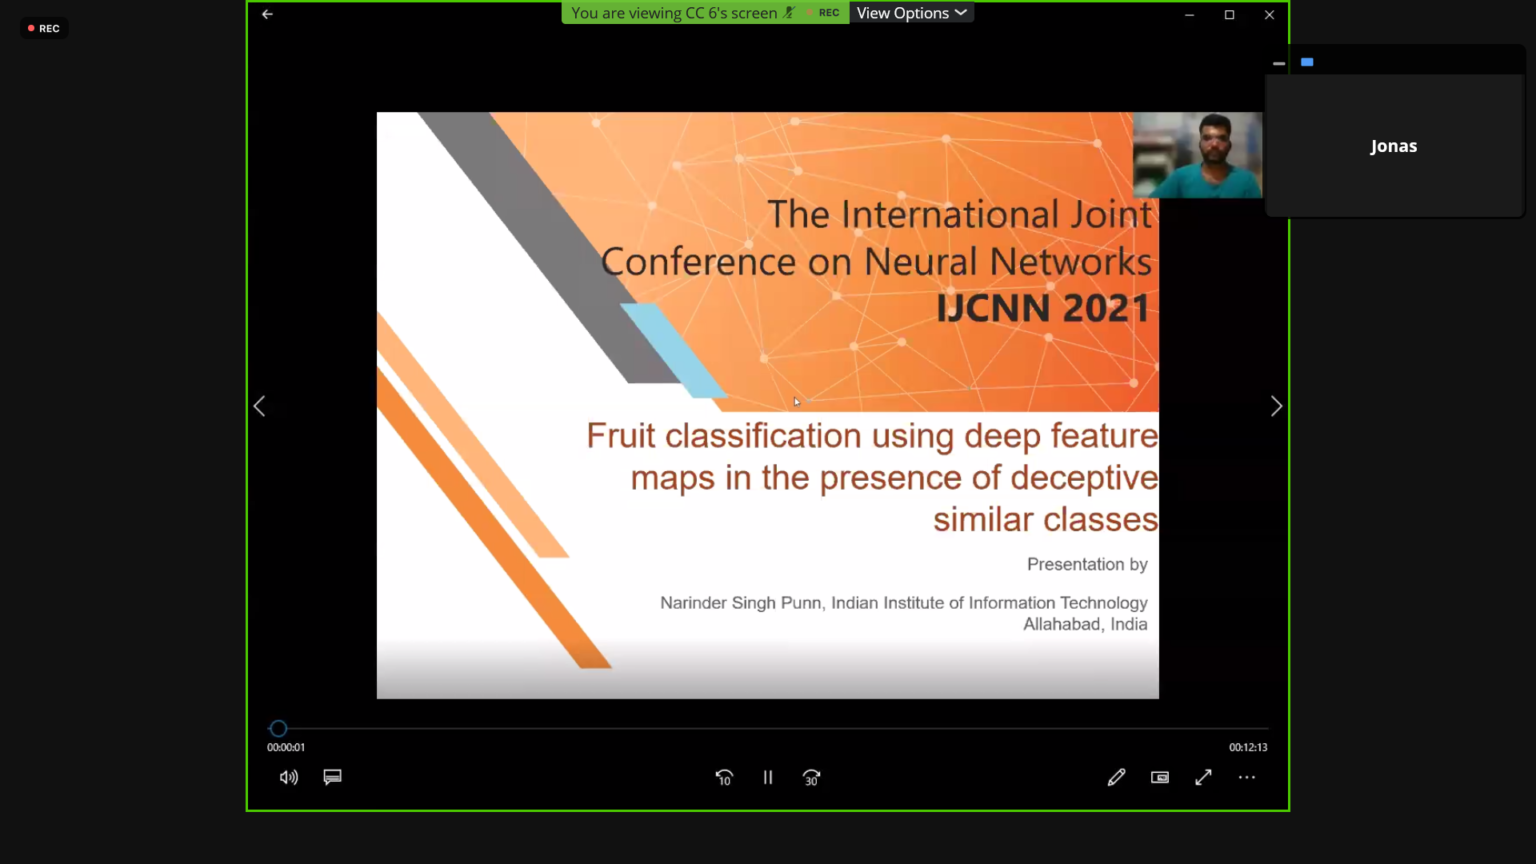 Attended International Joint Conference on Neural Networks (IJCNN) 2021